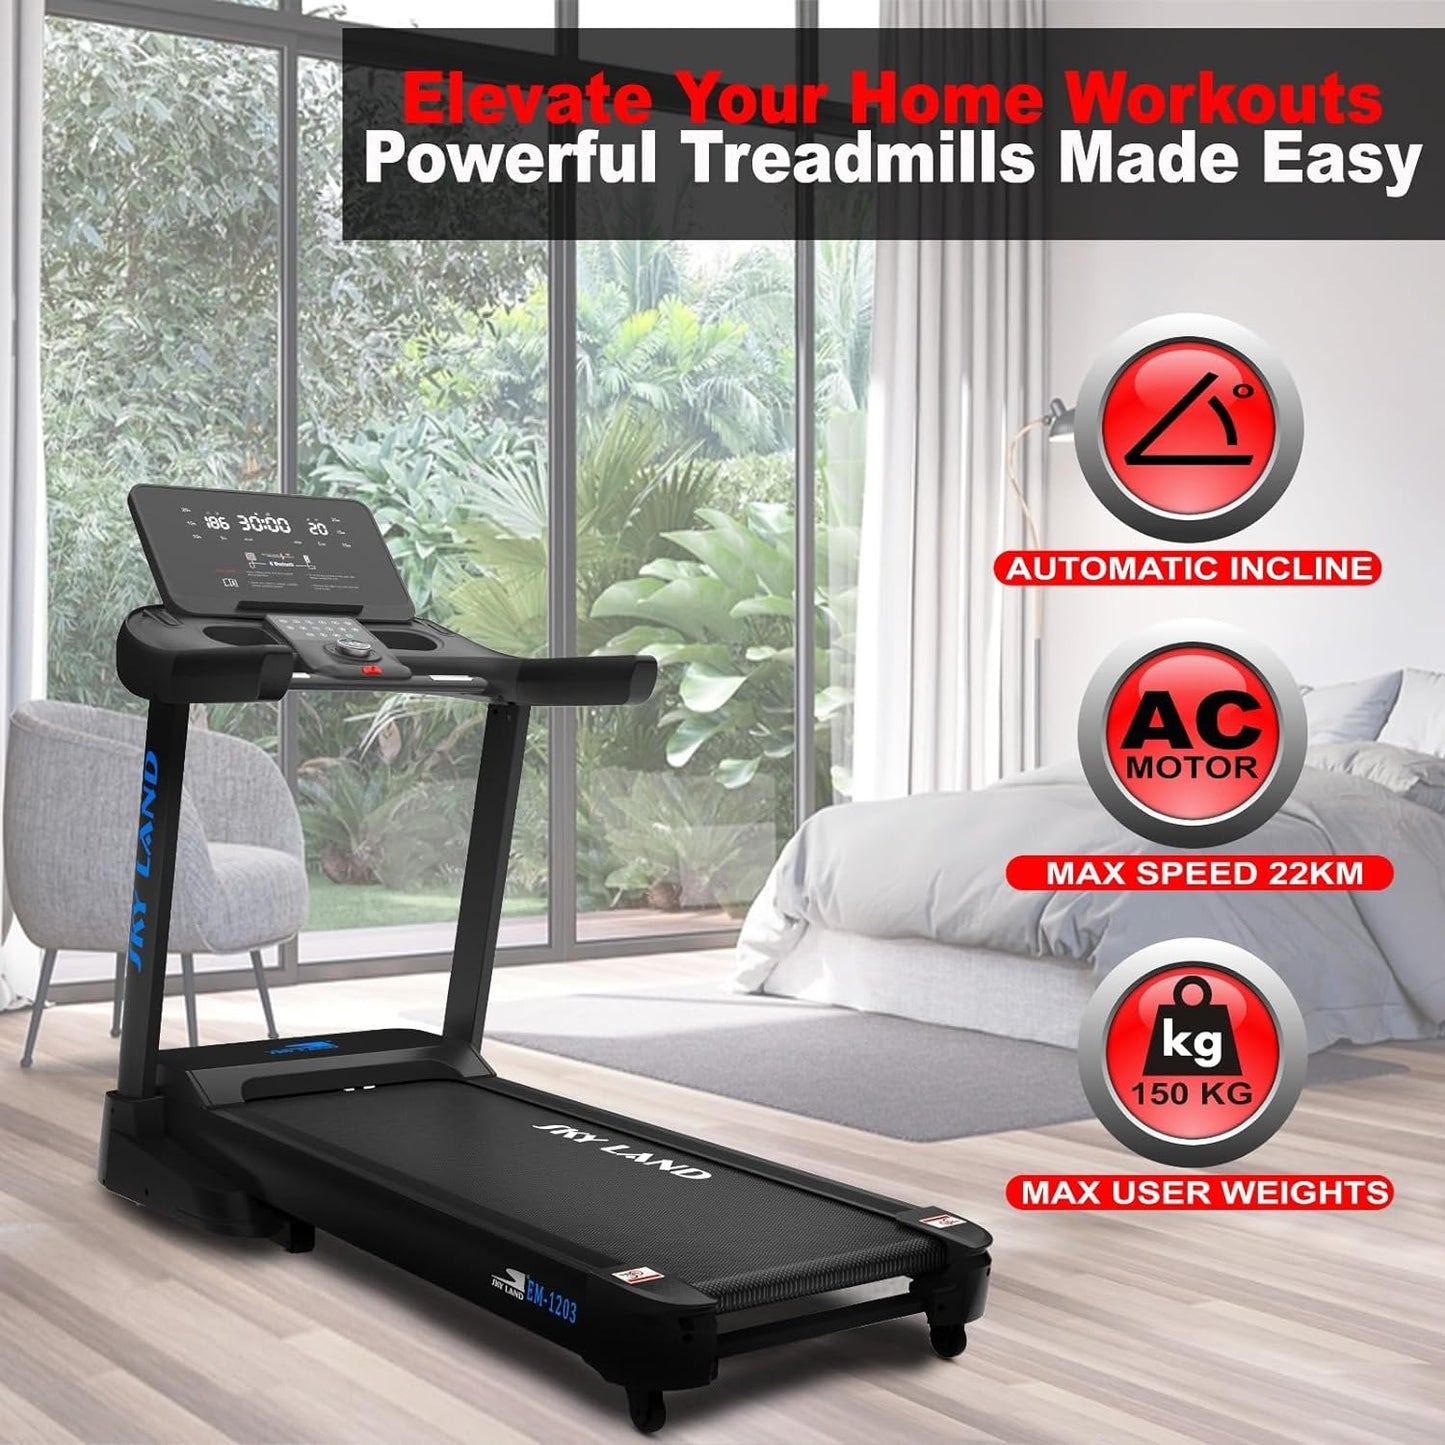 SKY LAND Fitness Treadmill - AC Motor Treadmill 7 HP Peak, Bluetooth, Auto Incline (20%), Max 150 kg - Premium Quality Treadmill for Home and Semi-Commercial Use | Treadmill With Multi App Support - COOLBABY